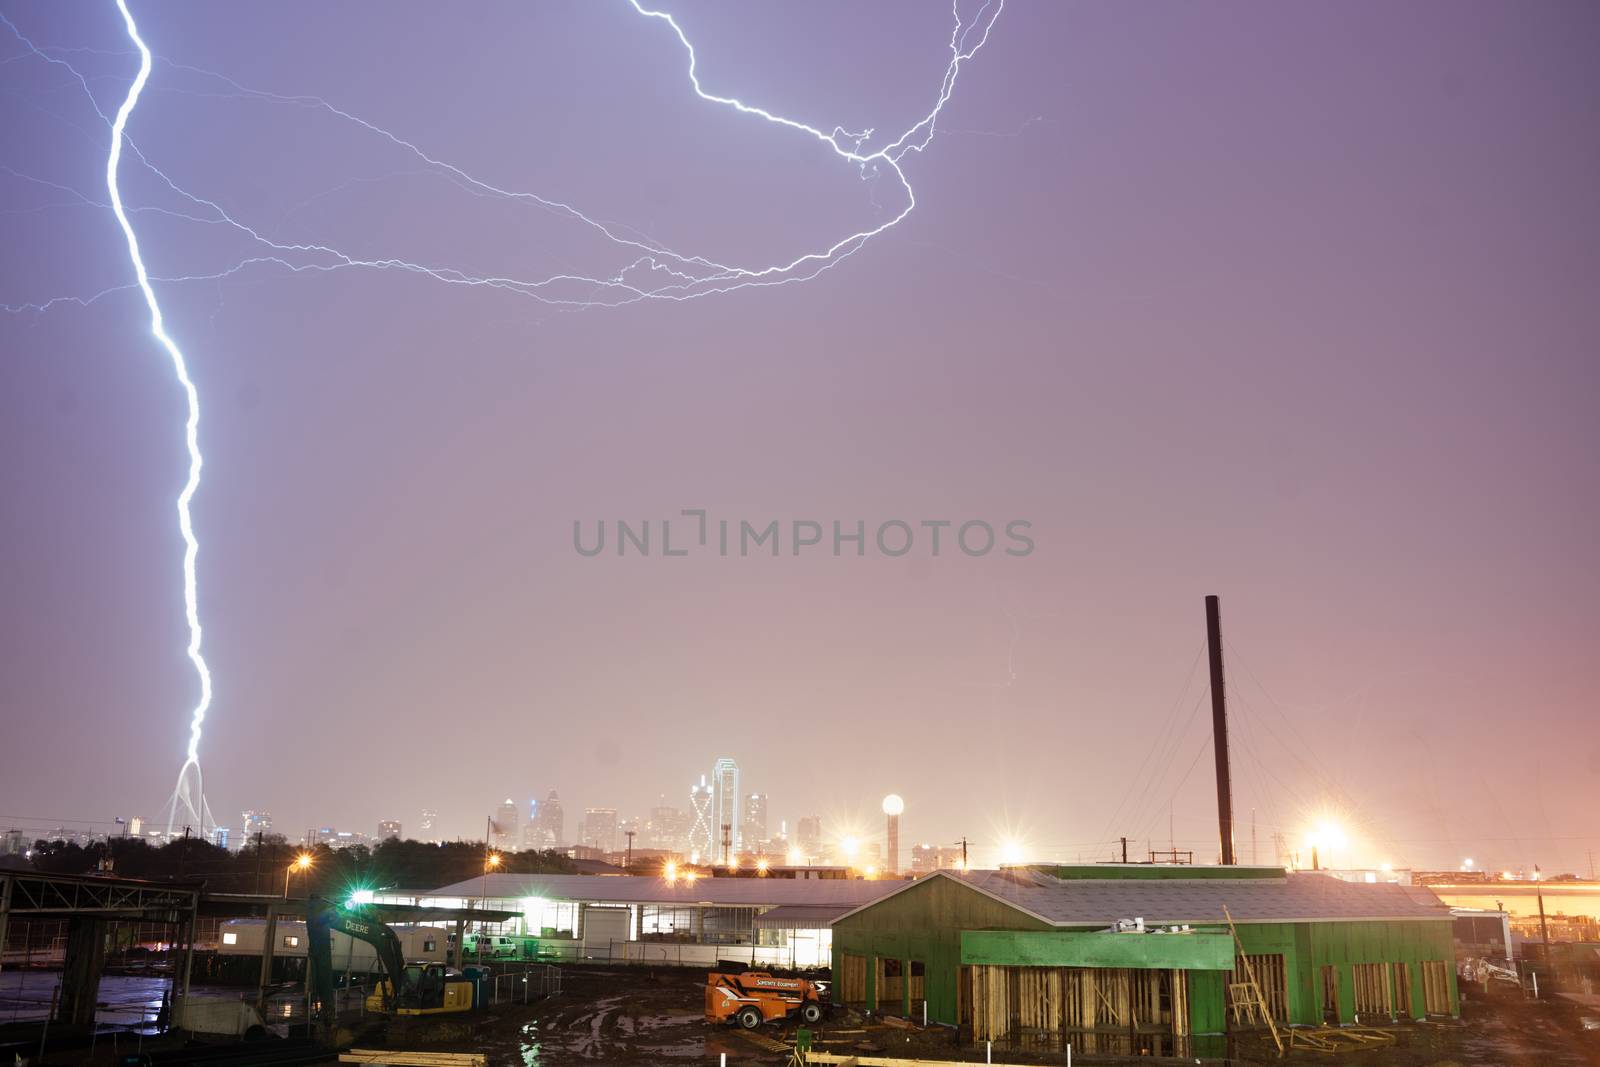 Deep South Thunderstorm Lightning Strike over Dallas Texas USA by ChrisBoswell